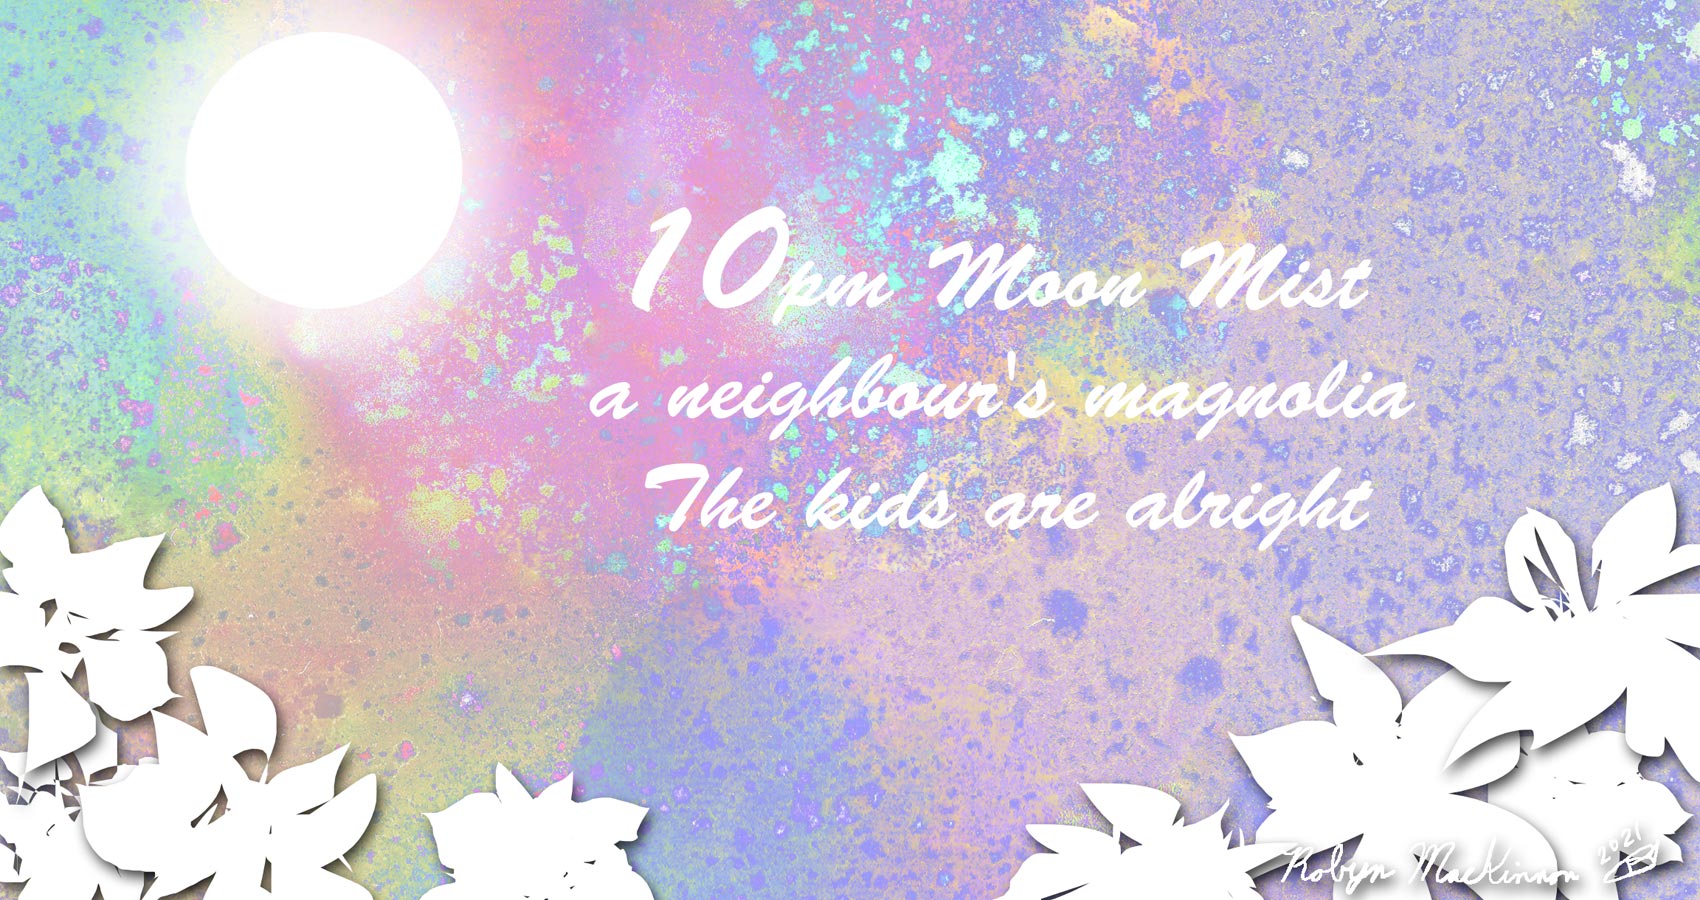 Moon Mist and Magnolias, a haiku by Robyn MacKinnon at Spillwords.com